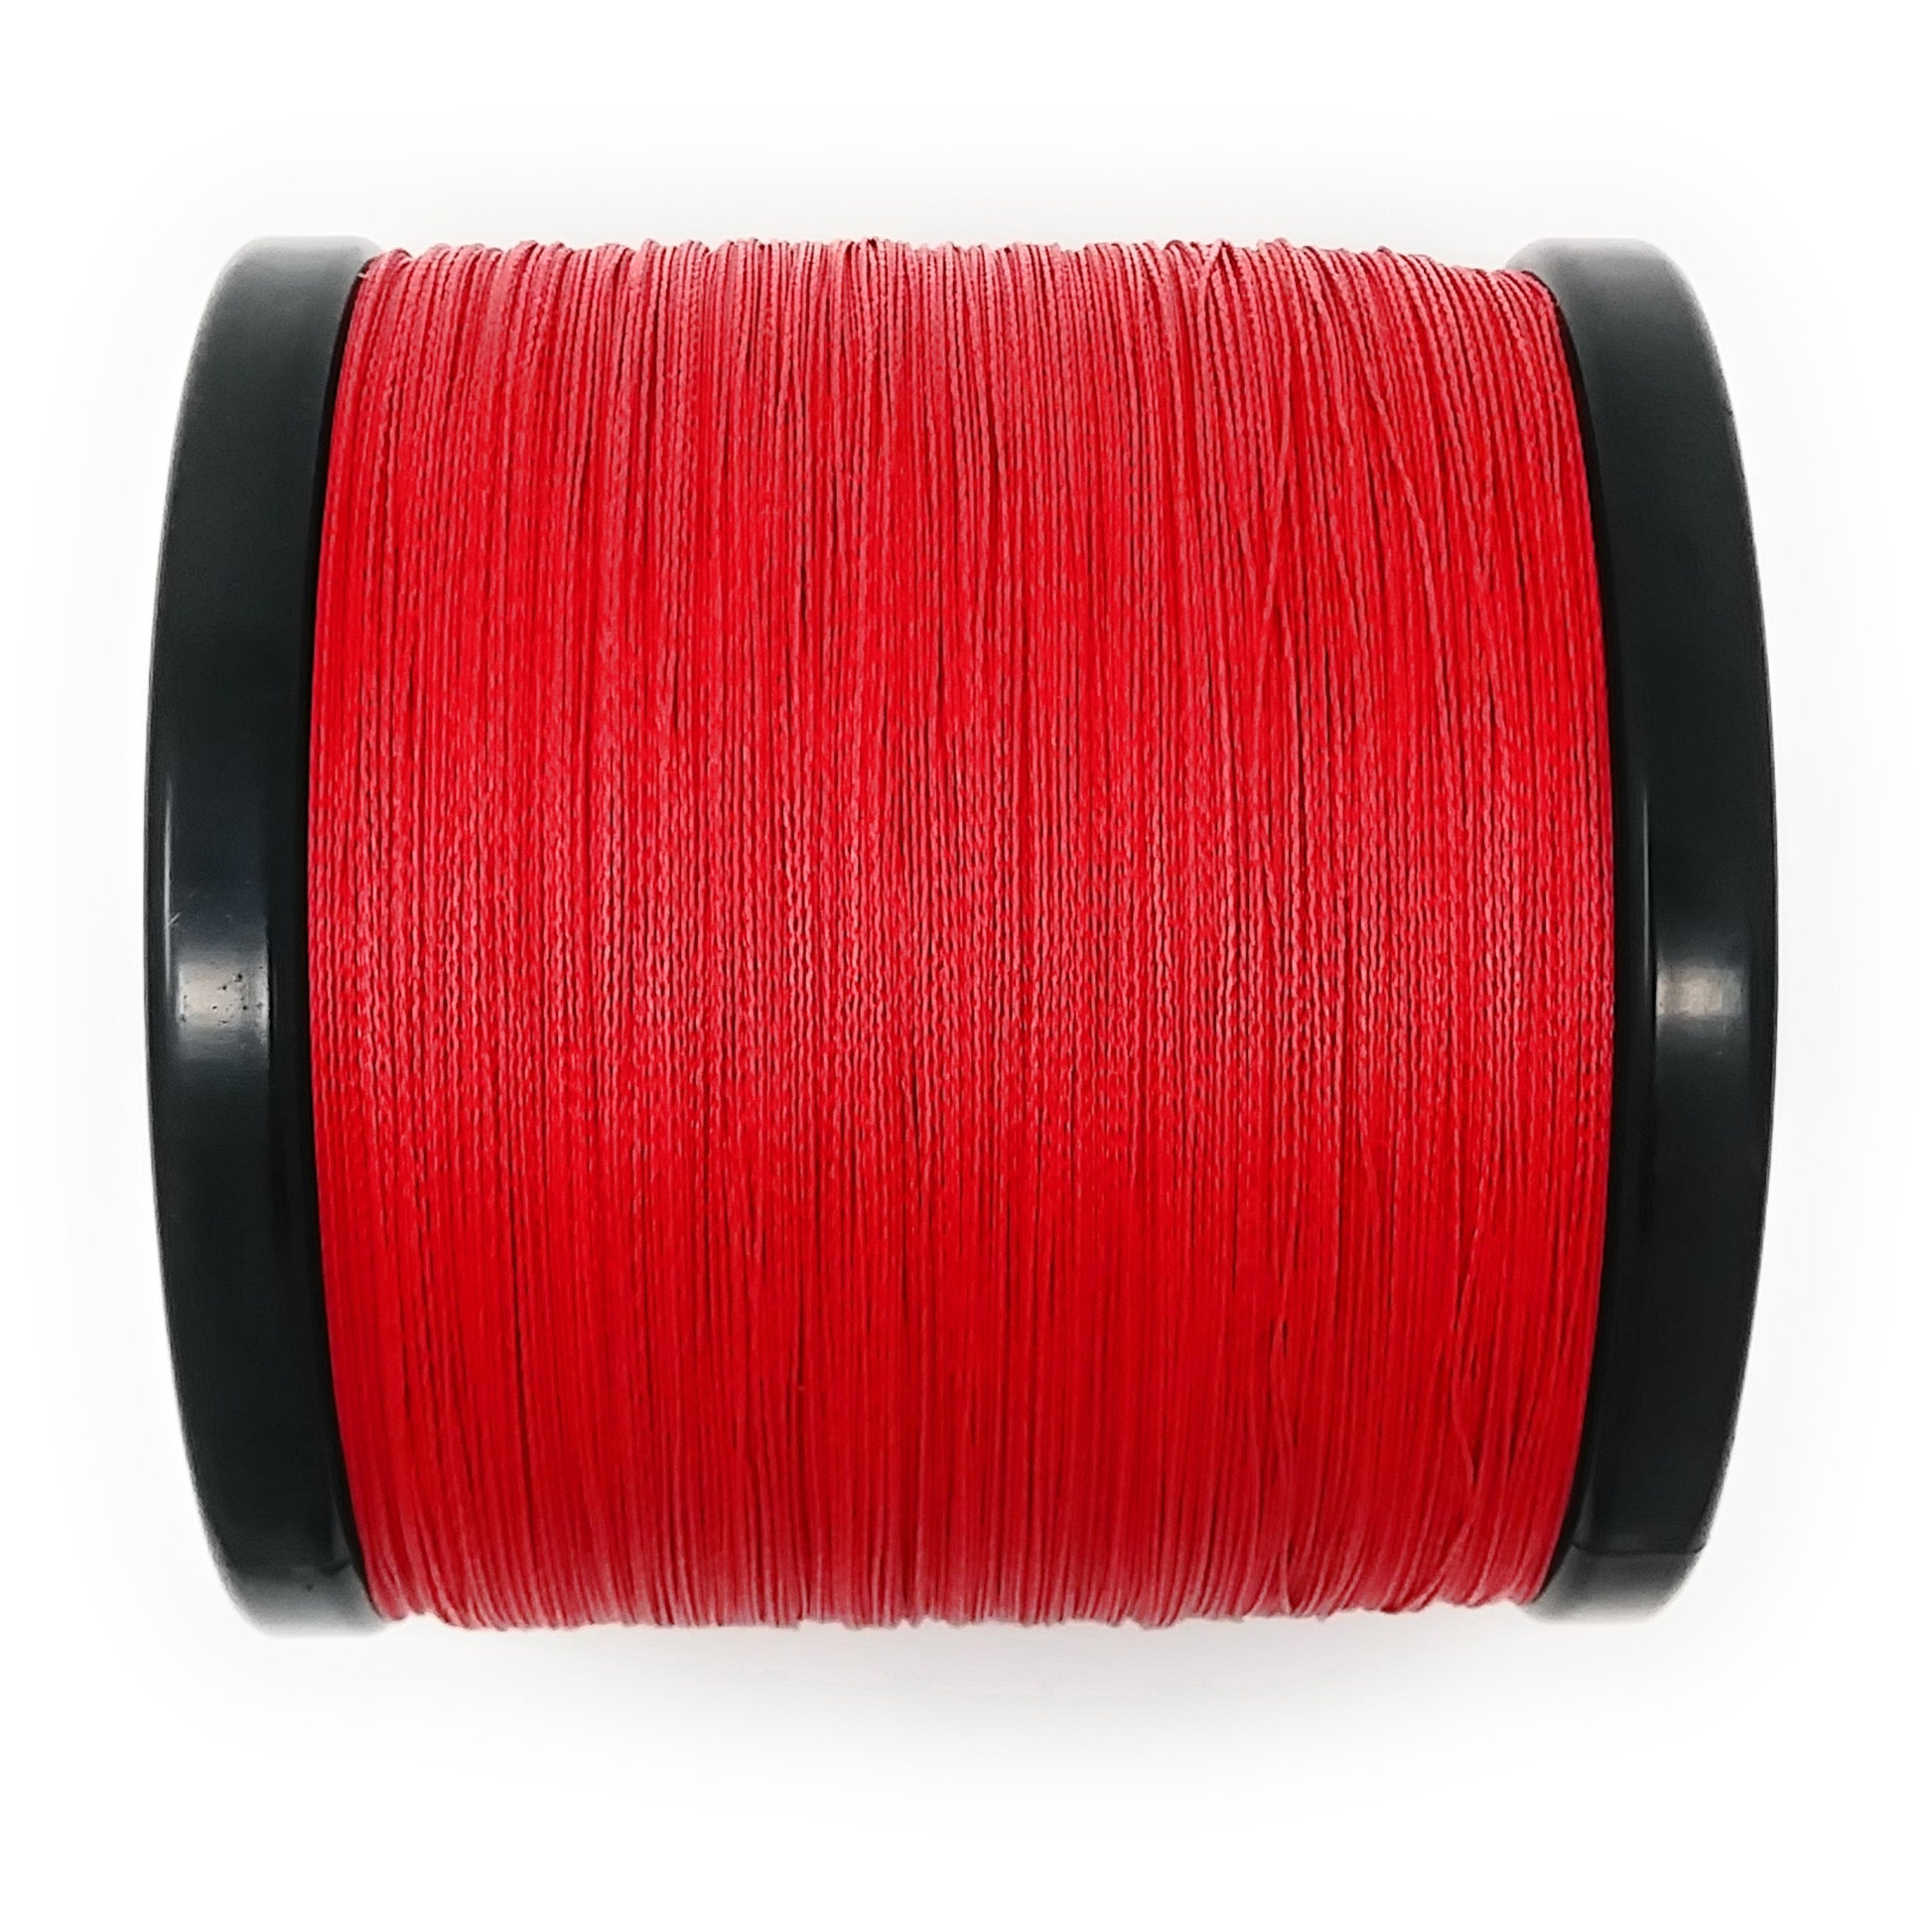 Reaction Tackle No Fade Red 30lb 1500yd, Size: 30 lbs